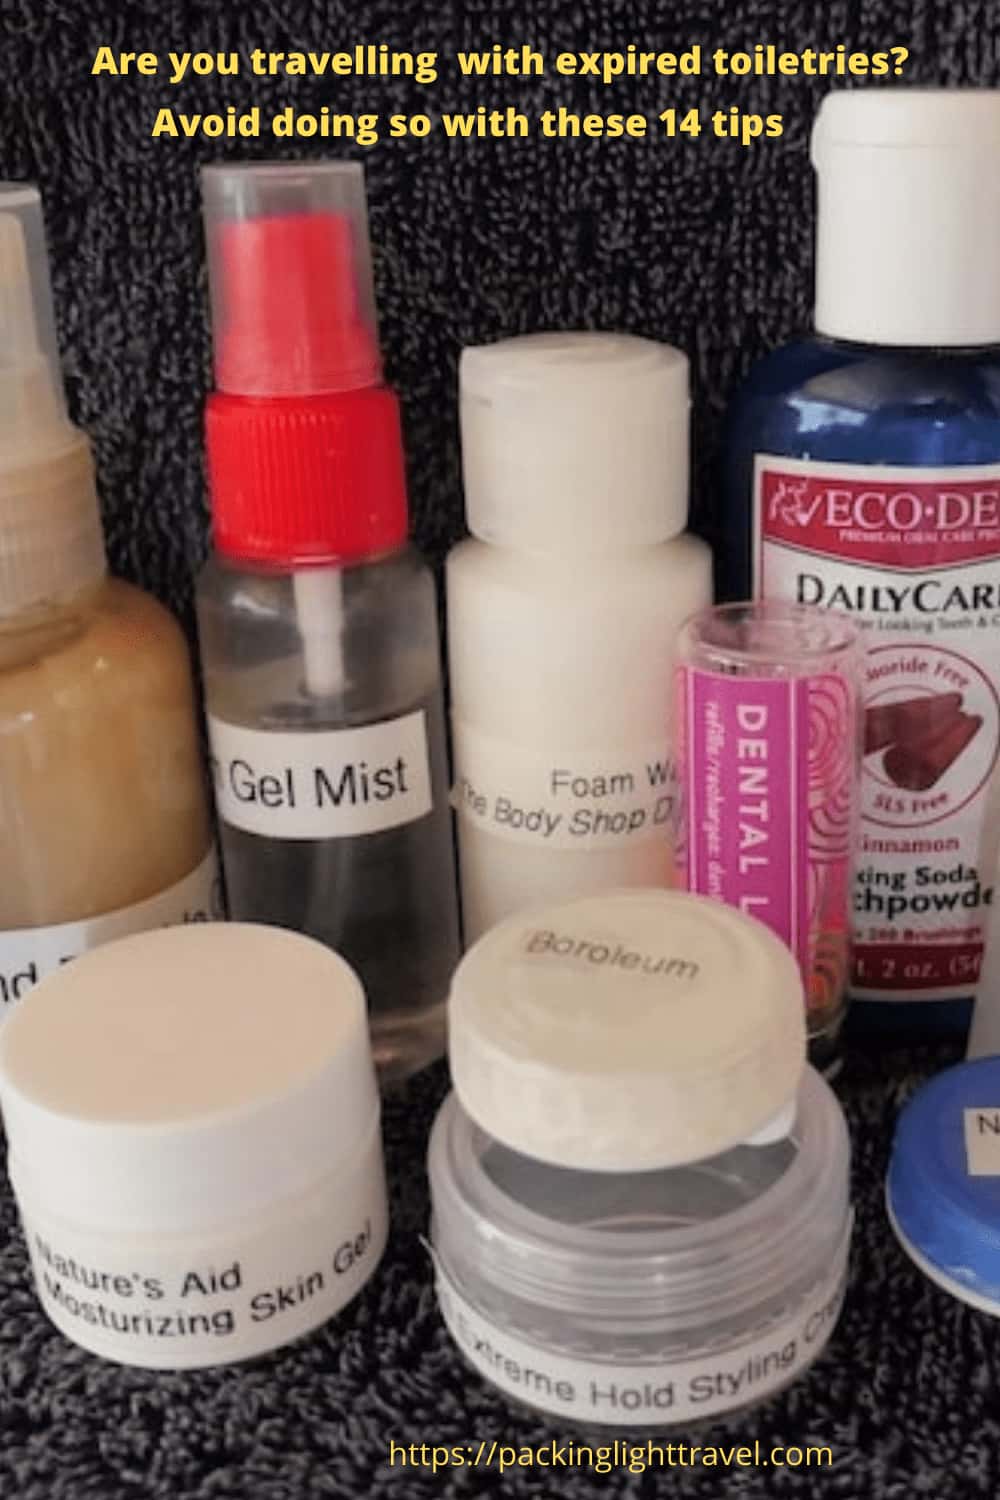 https://packinglighttravel.com/wp-content/uploads/2021/02/tips-to-avoid-travelling-with-expired-toiletries.jpg